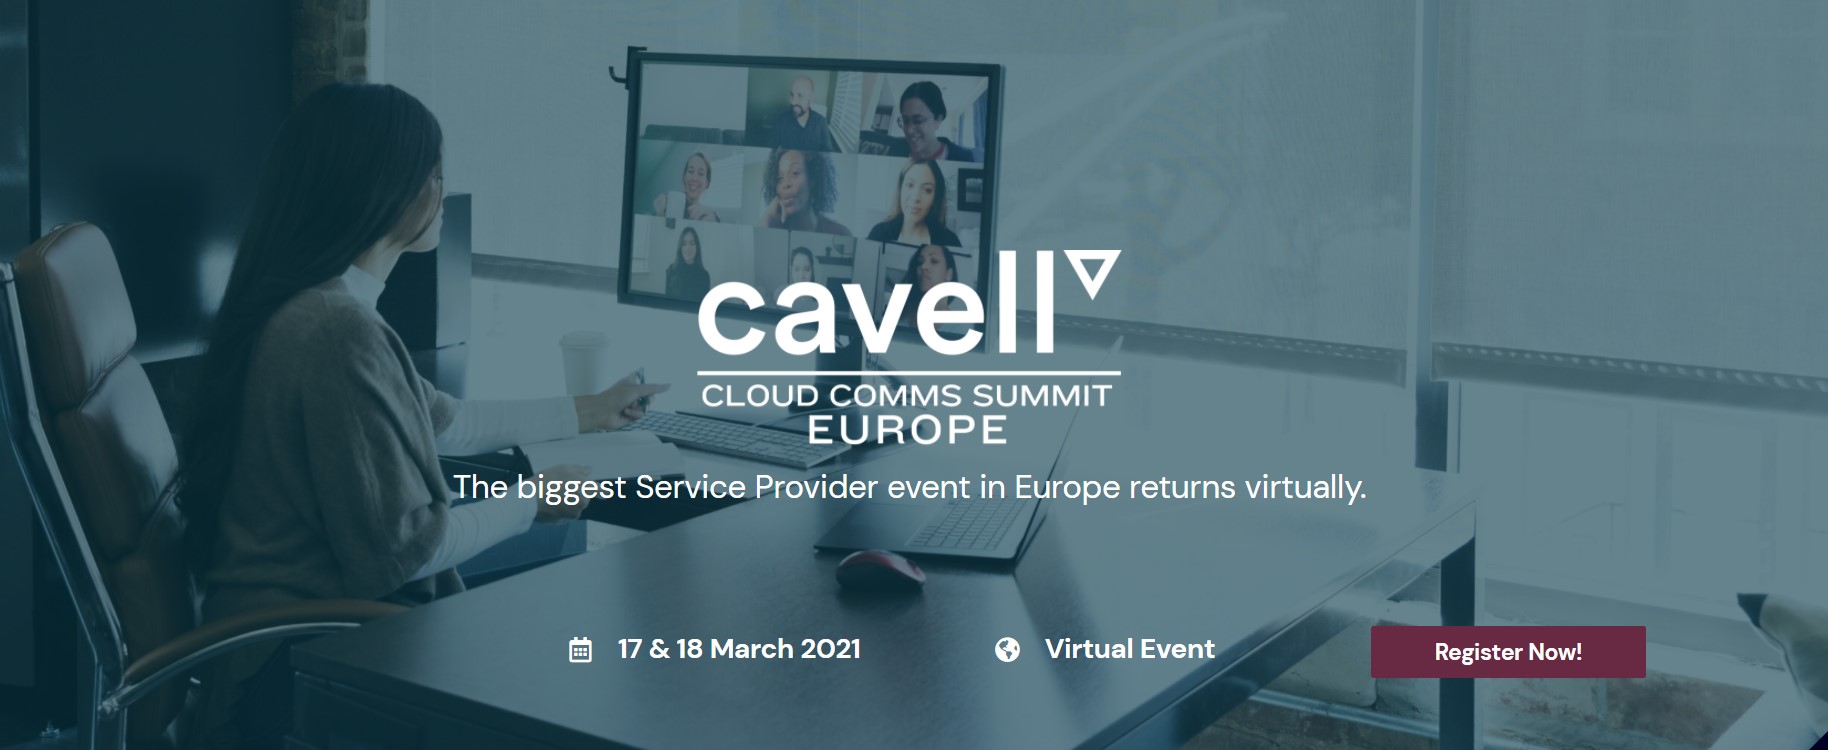 Upcoming Online Summit: Cloud Comms Summit